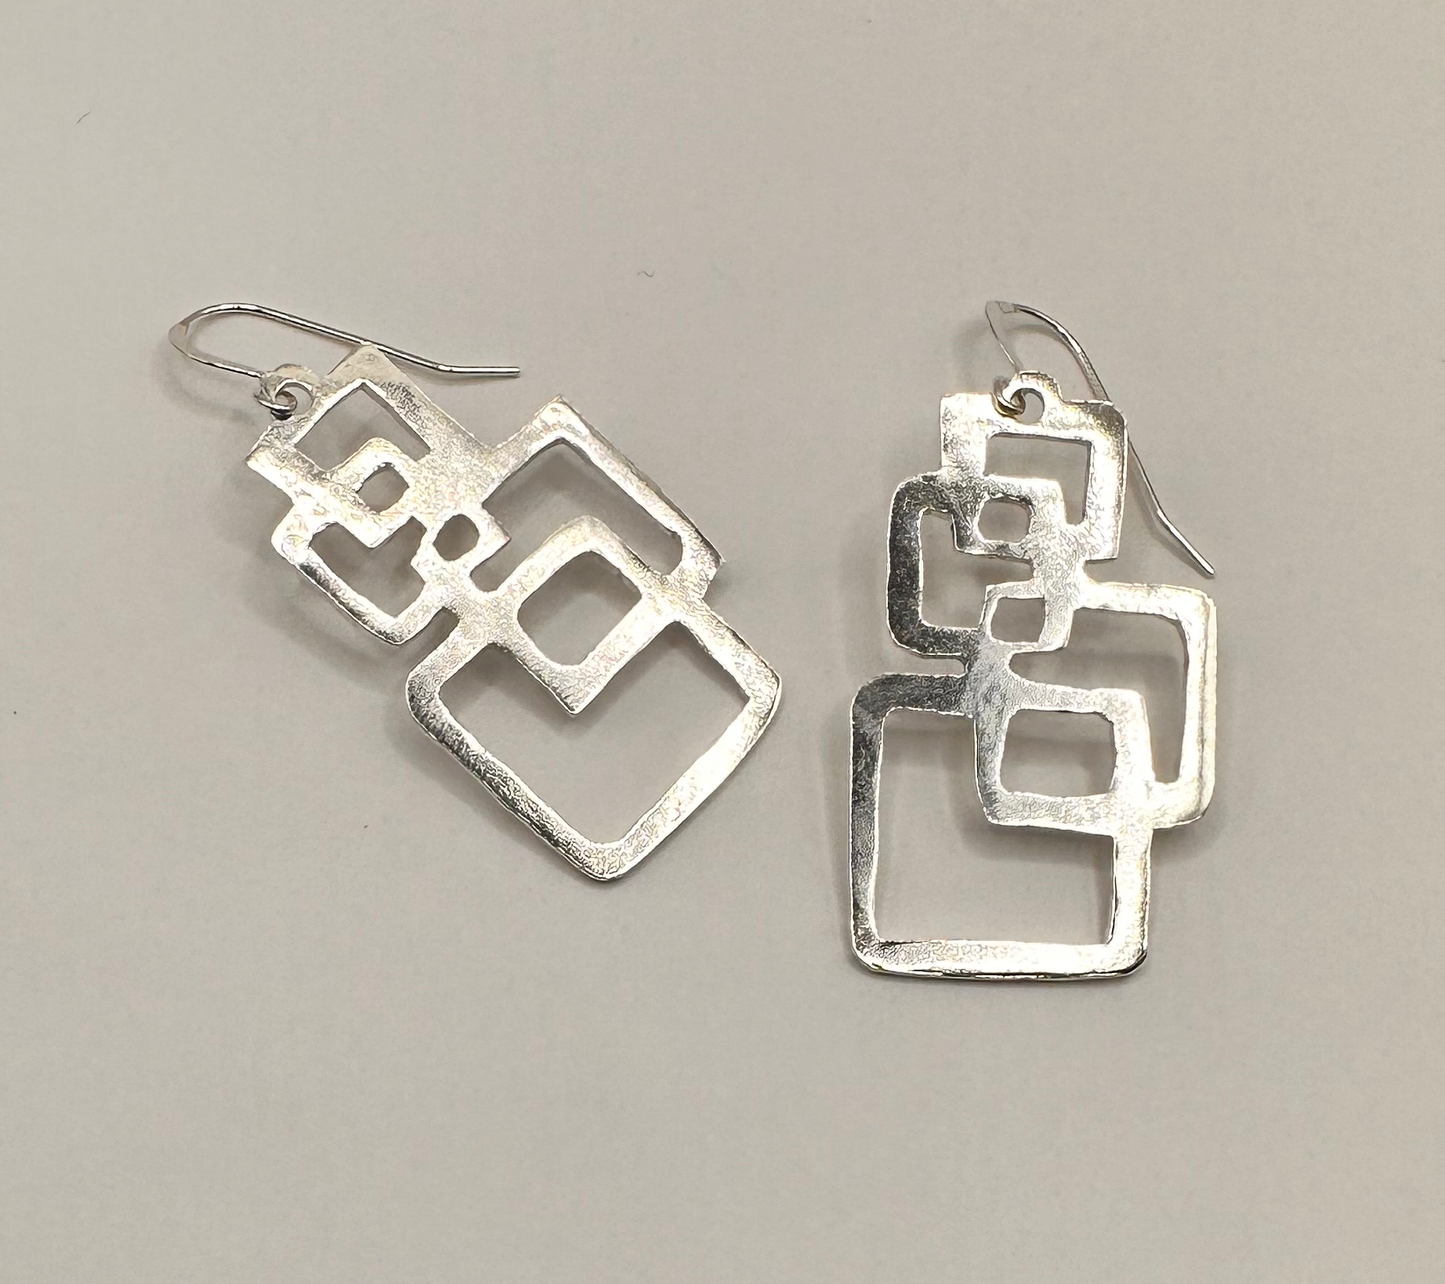 Artisan Crafted Abstract Undefined Lines Sterling Silver Earrings